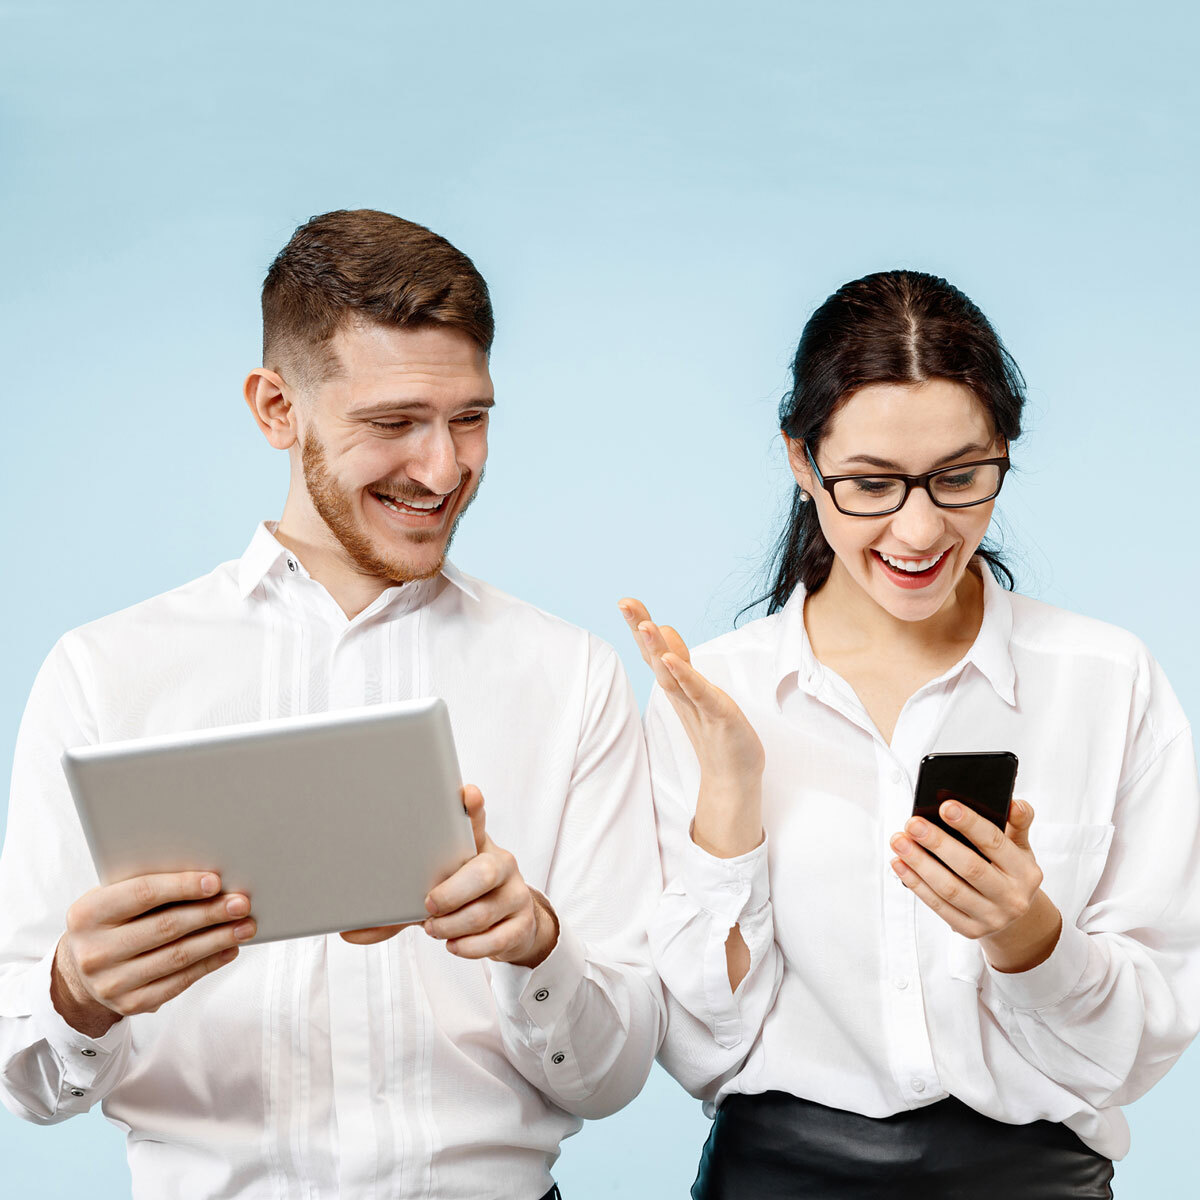 A woman looking at her phone with excitement and a man next to her holding a tablet looking at the woman's phone with a happy face as well.